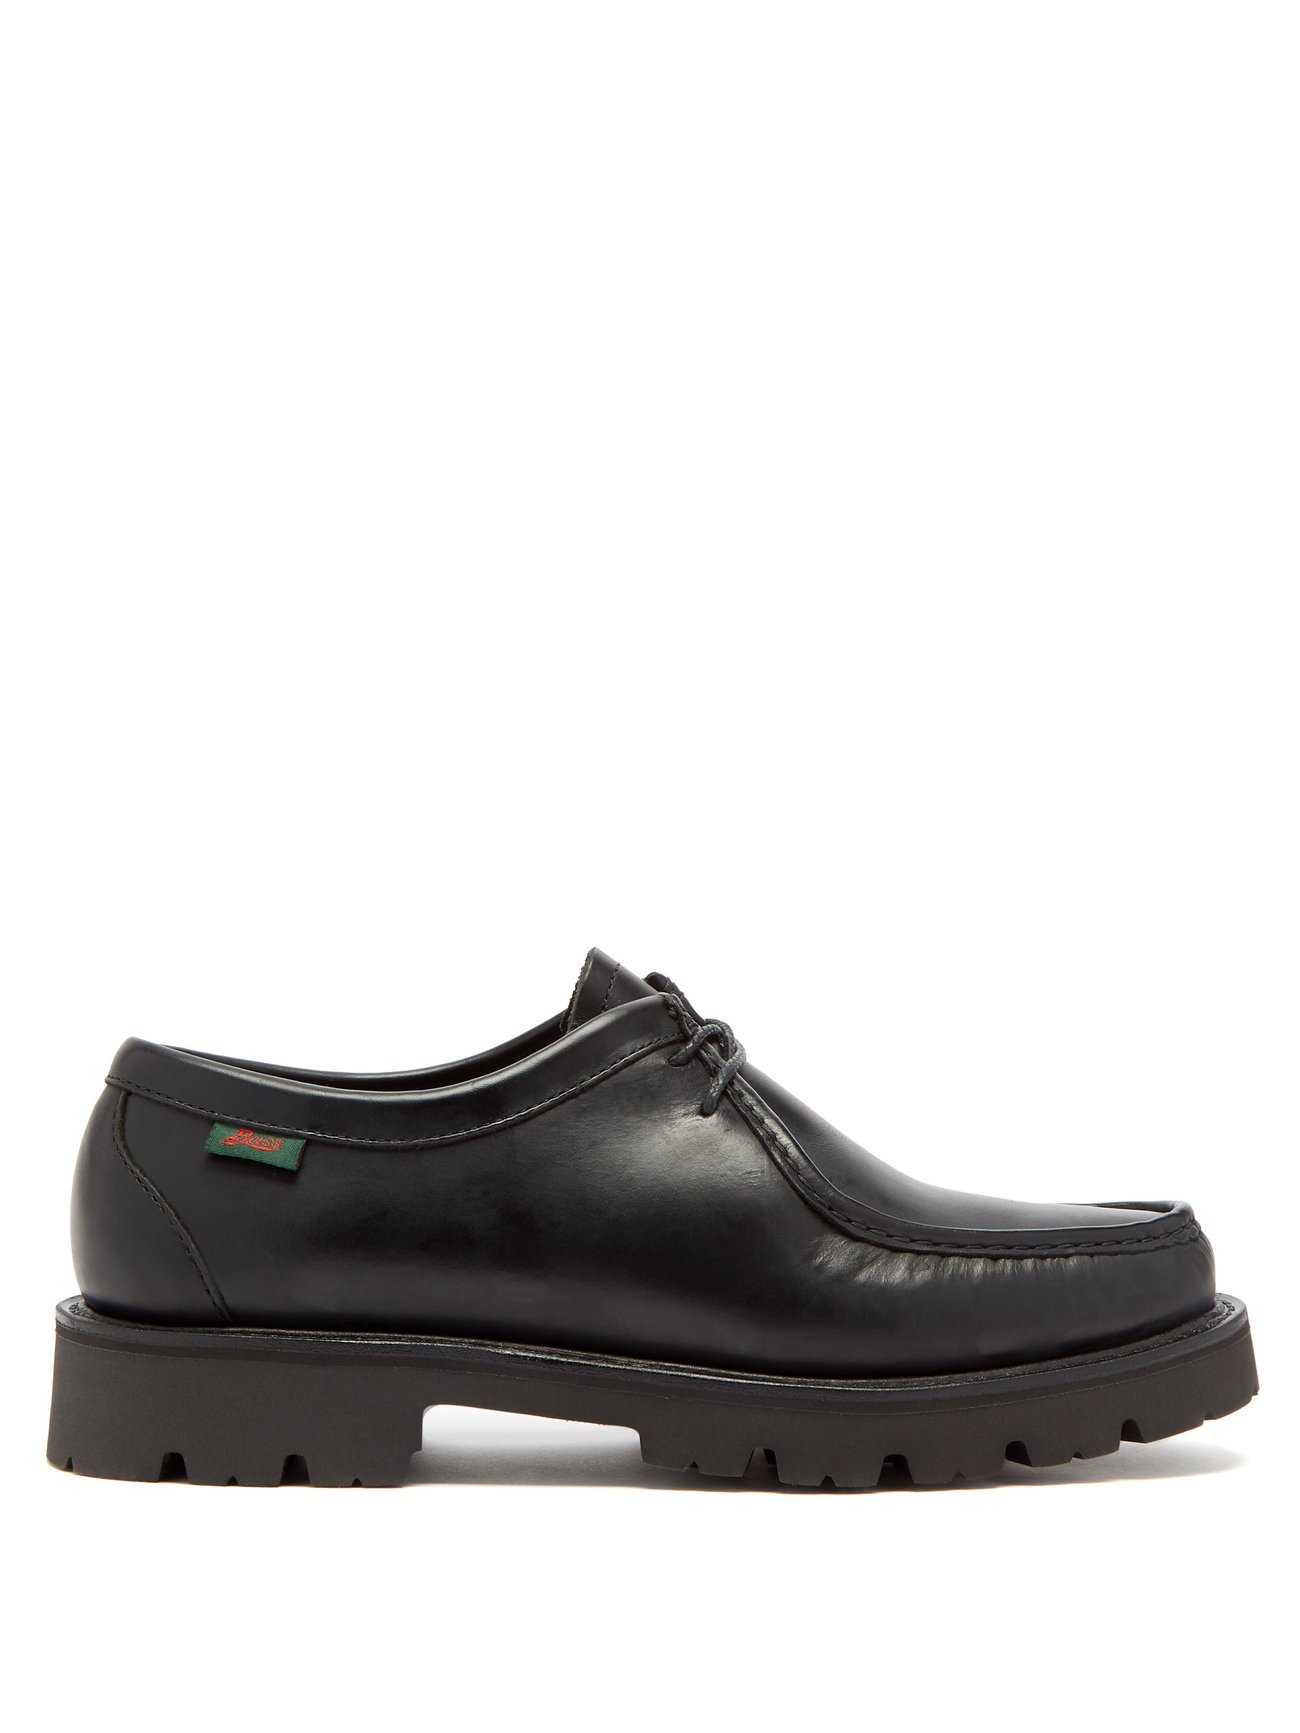 Black Ranger Moc Wallace leather Derby shoes | G.H. Bass & Co ...